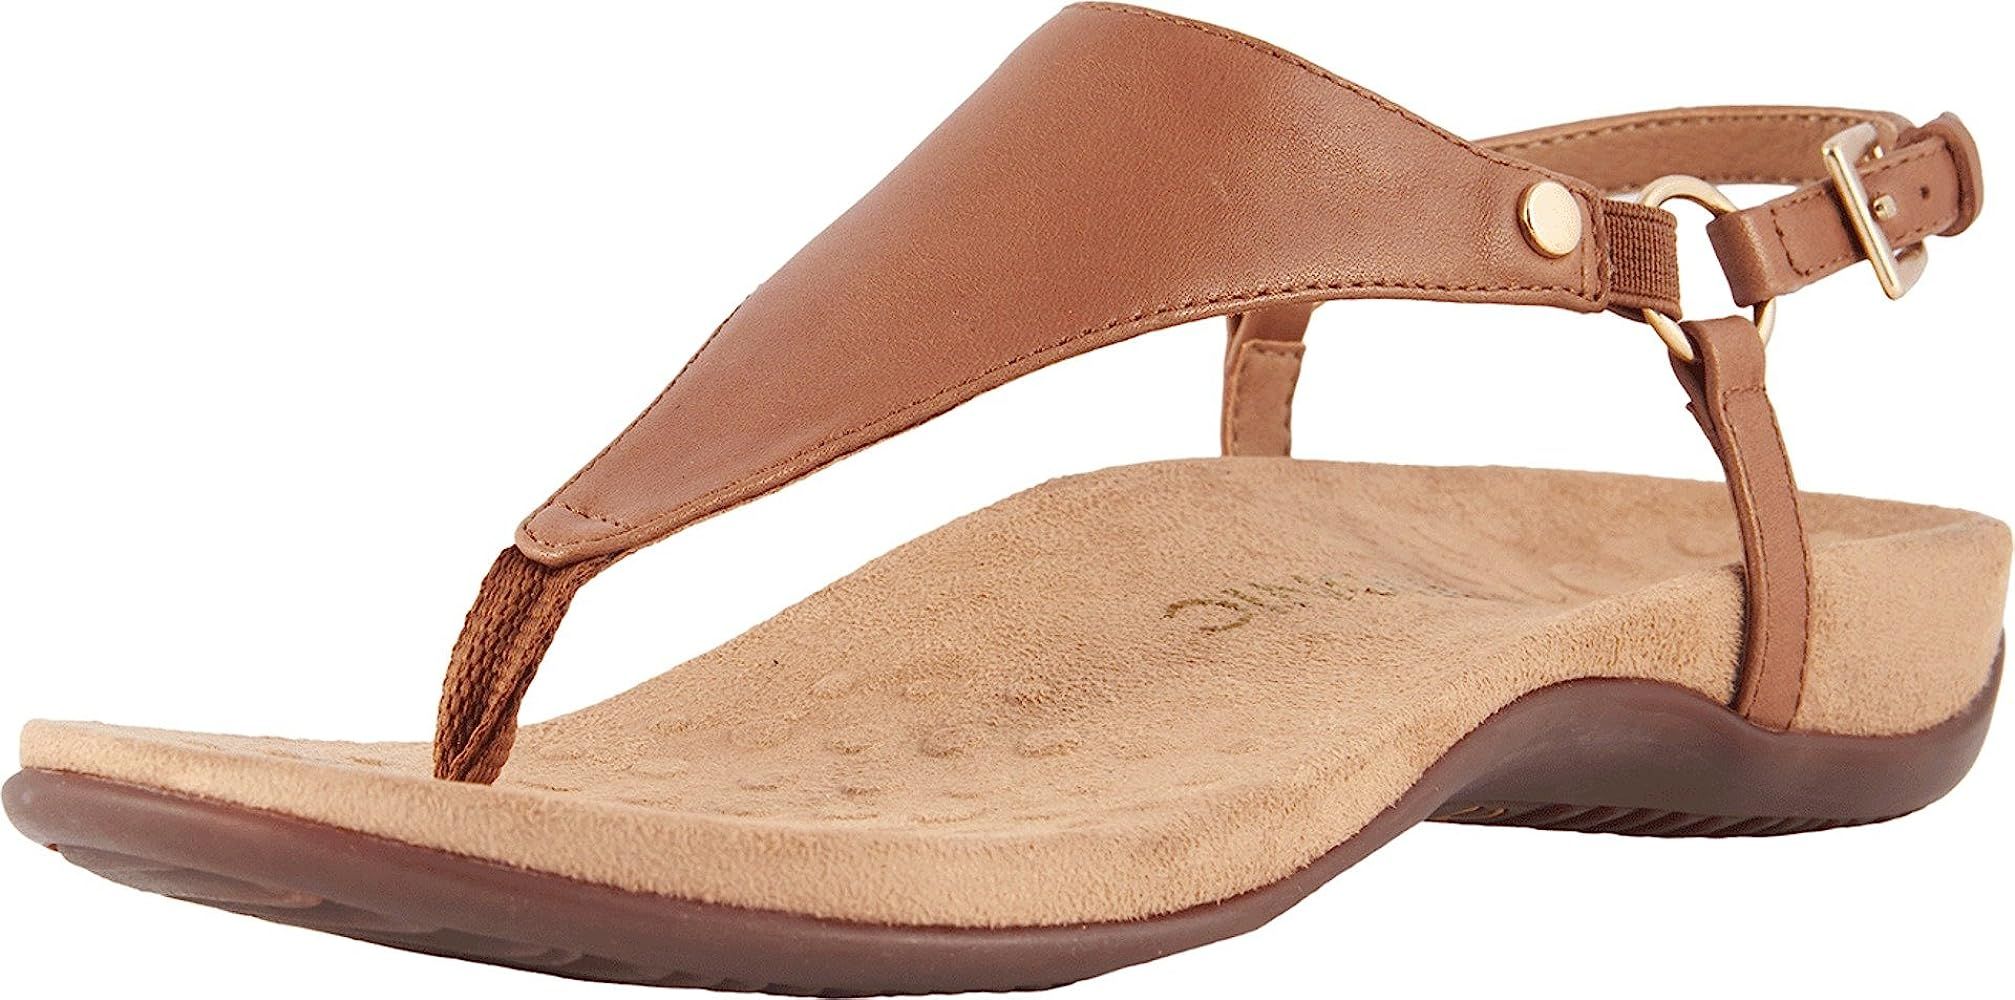 Women's Rest Kirra Backstrap Sandal - Ladies Sandals with Concealed Orthotic Arch Support | Amazon (US)